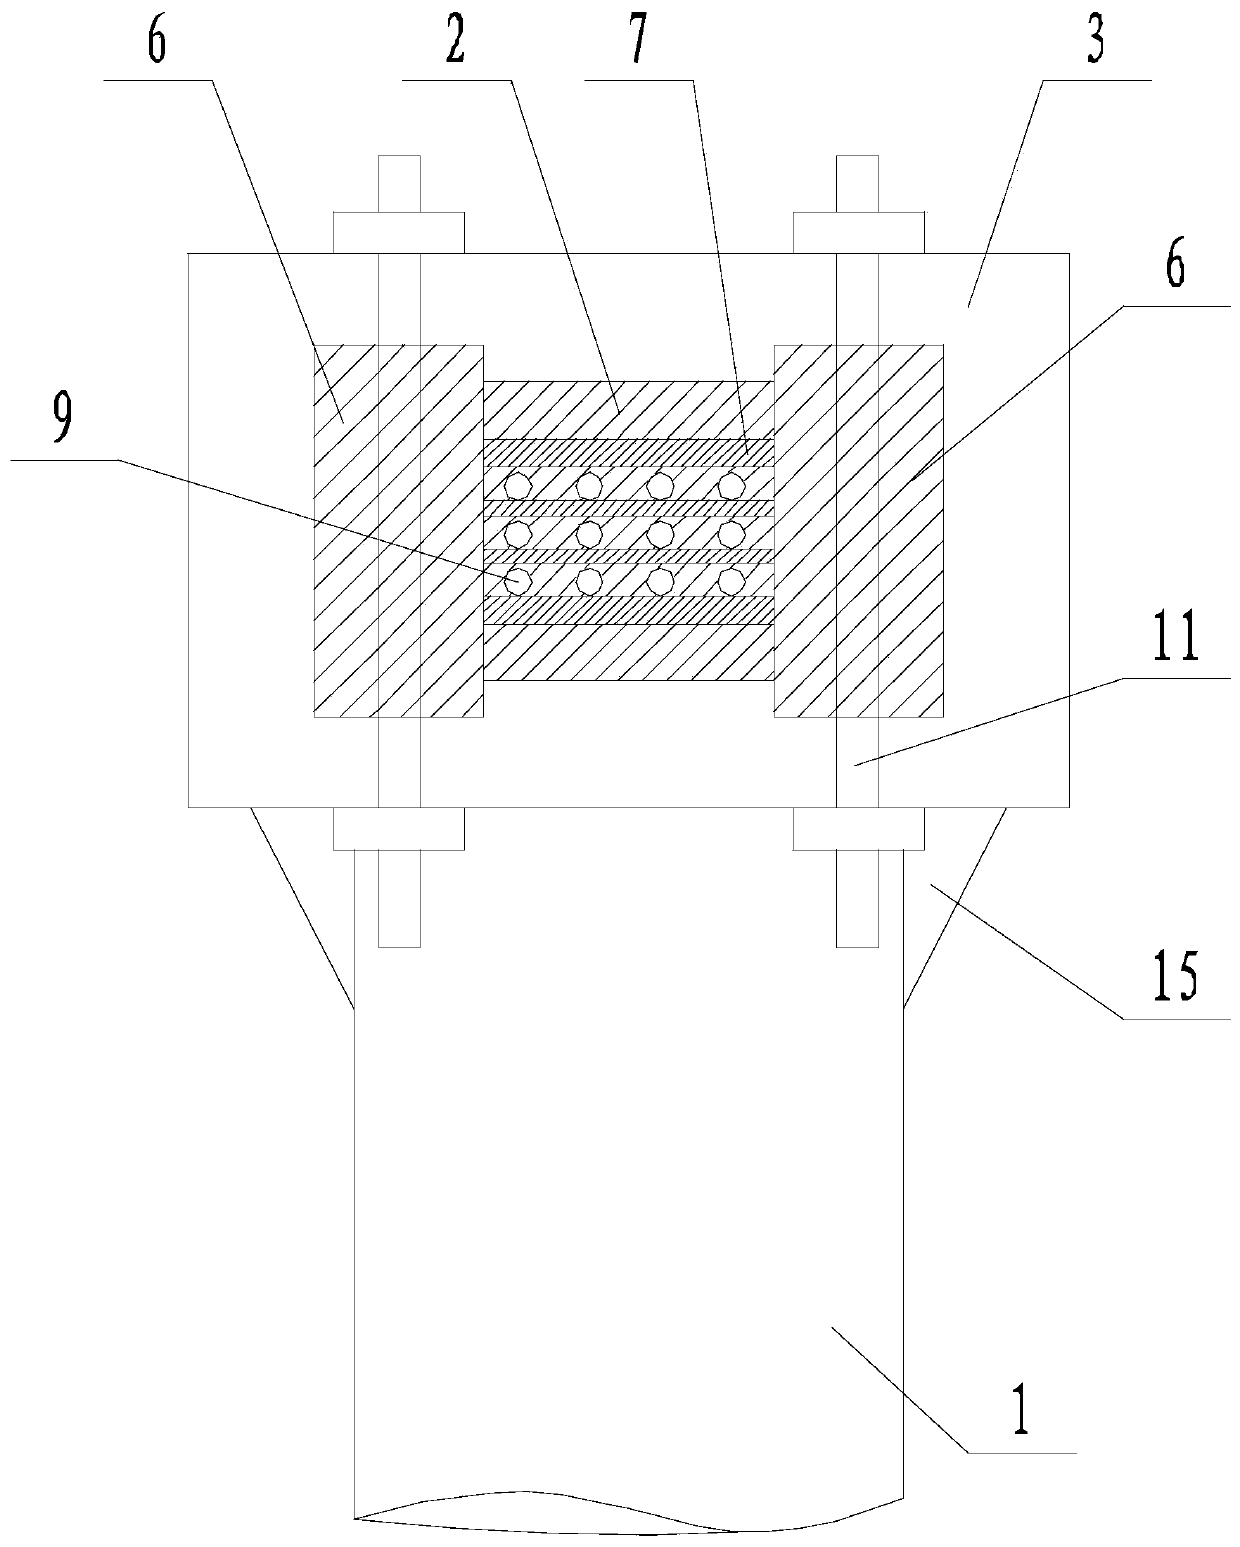 Connection node and method for reinforced concrete conversion column wrapping reinforced concrete conversion beam